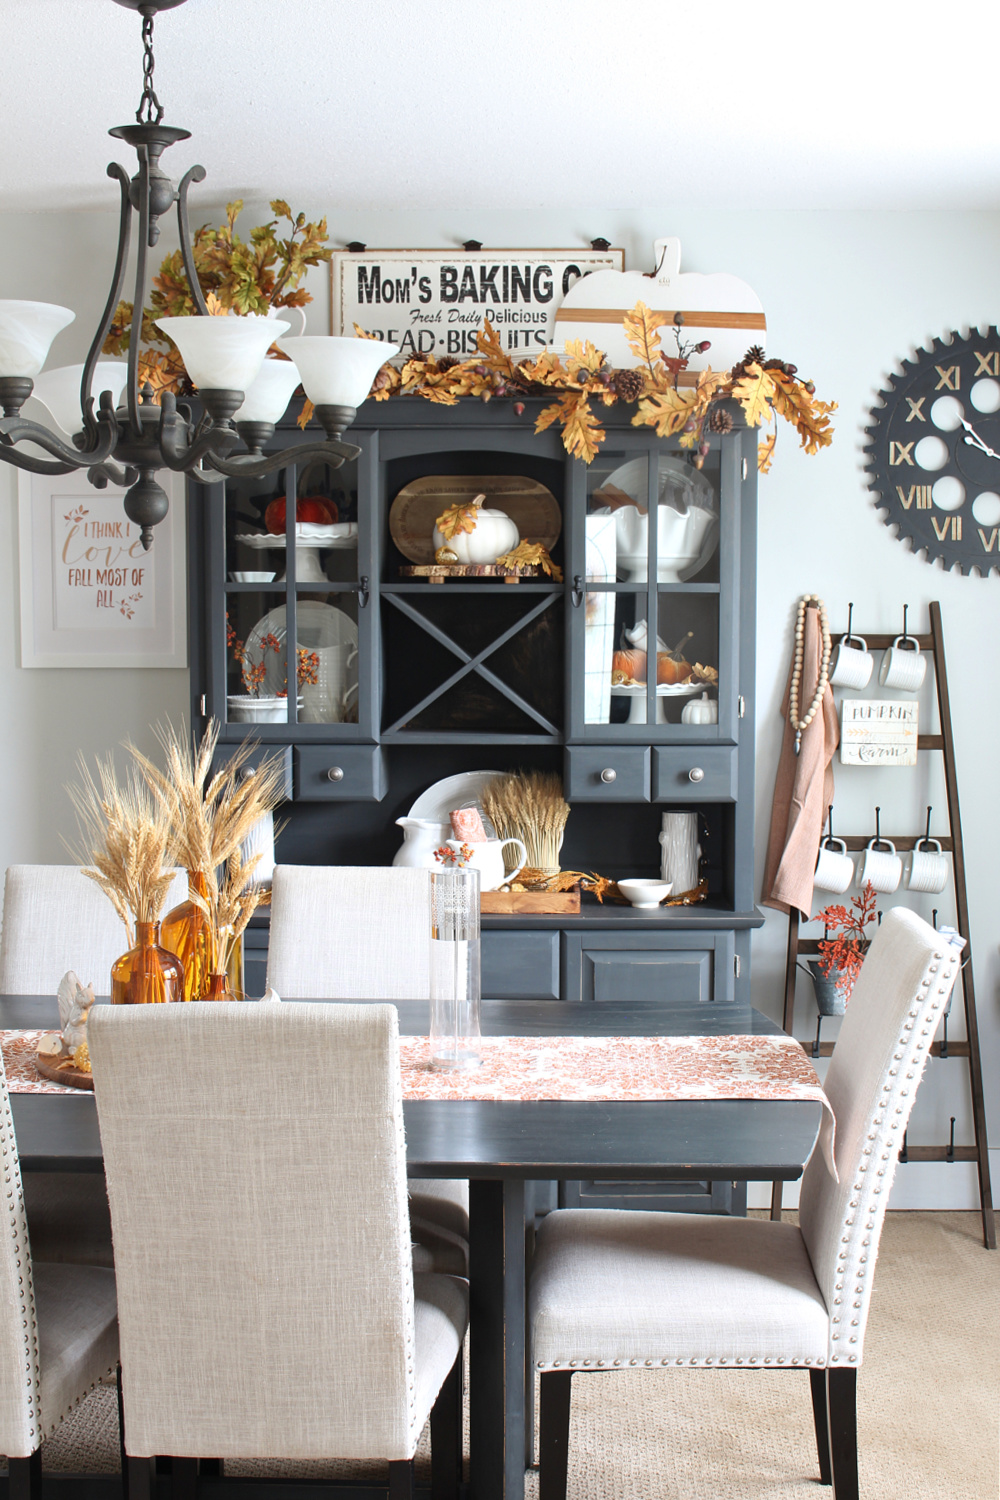 Traditional fall decor colors in a dining room with painted black table and hutch.